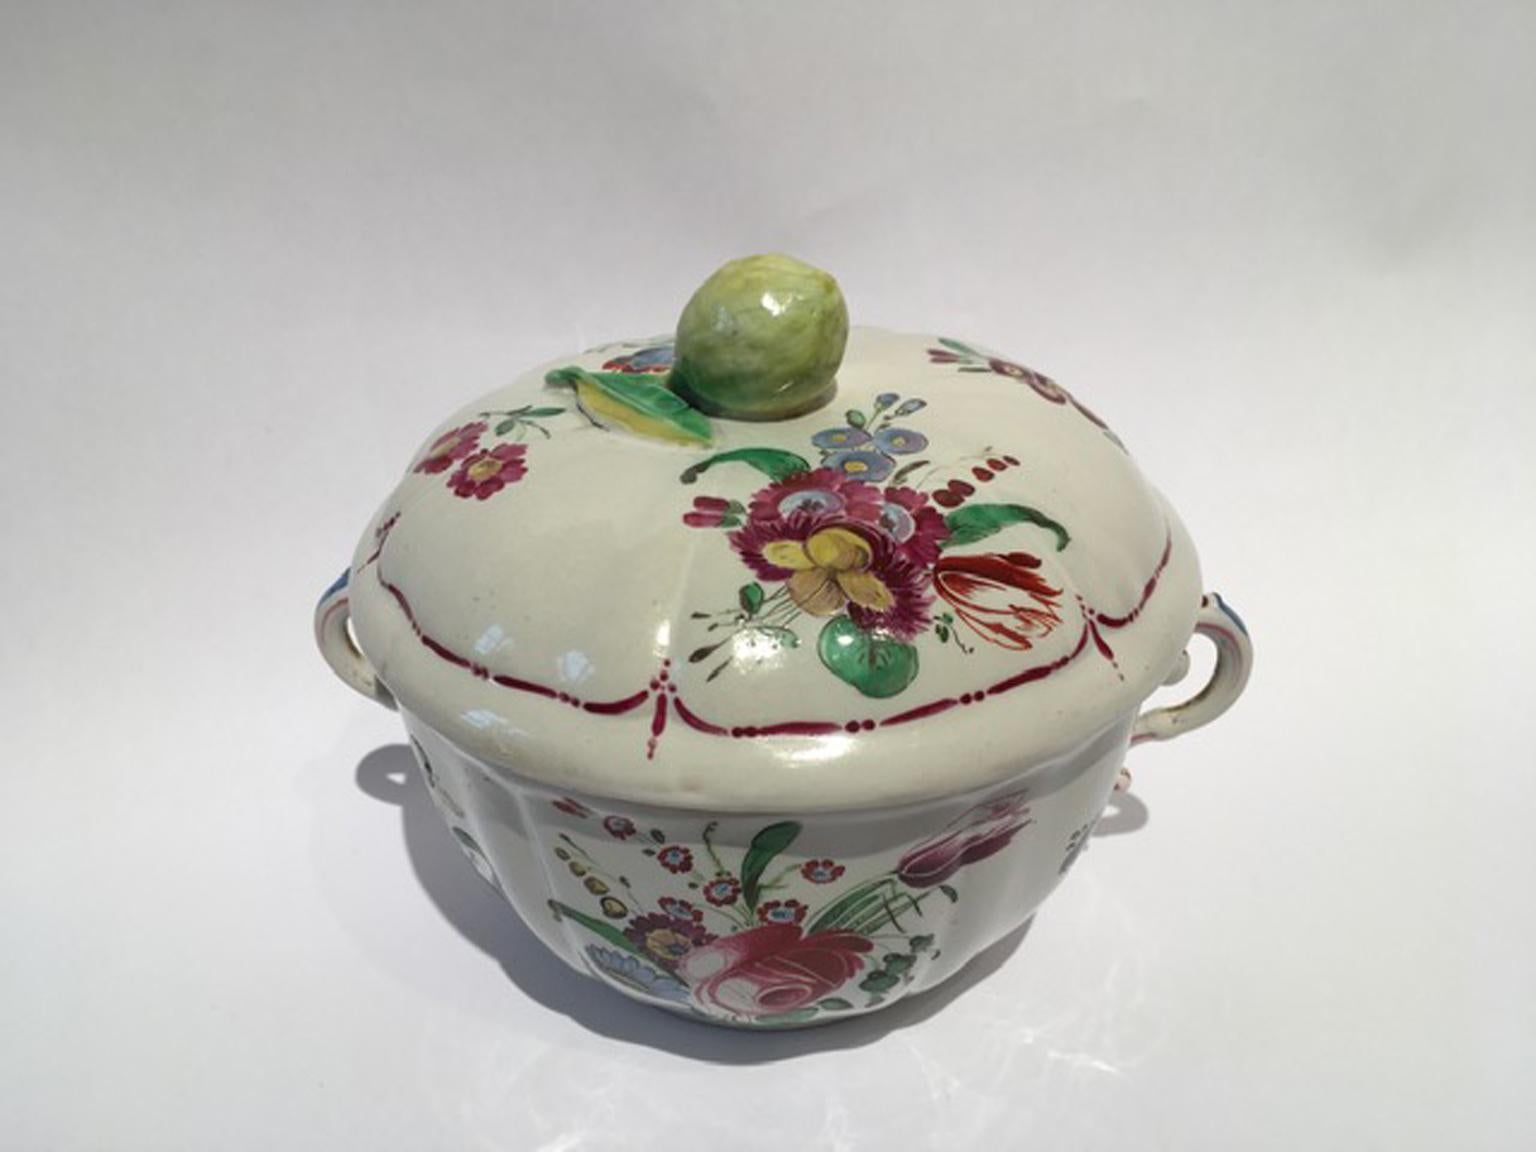 Italy 18th Century Richard Ginori Porcelain Sugar Bowl with Floral Drawings 8